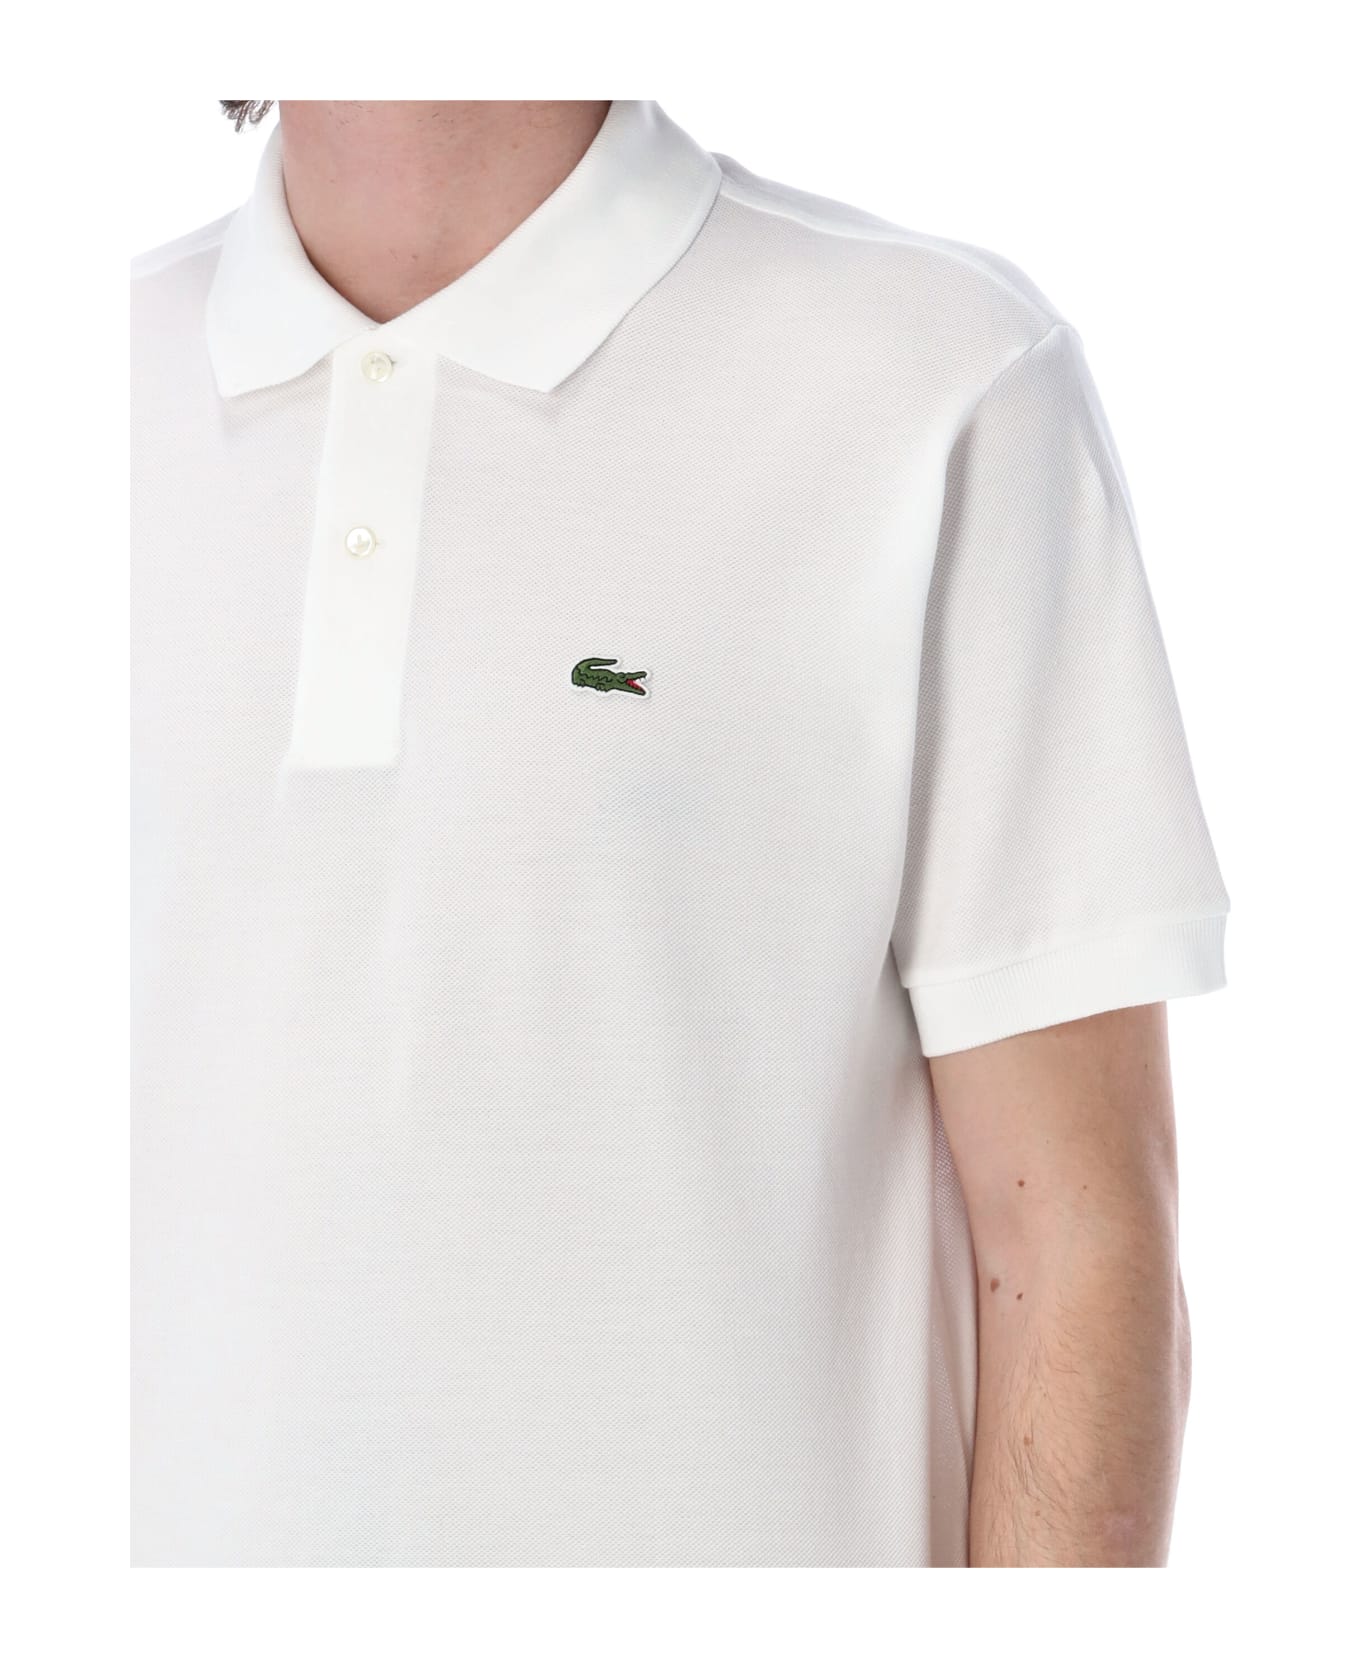 Lacoste Classic Fit Polo Shirt - WHITE